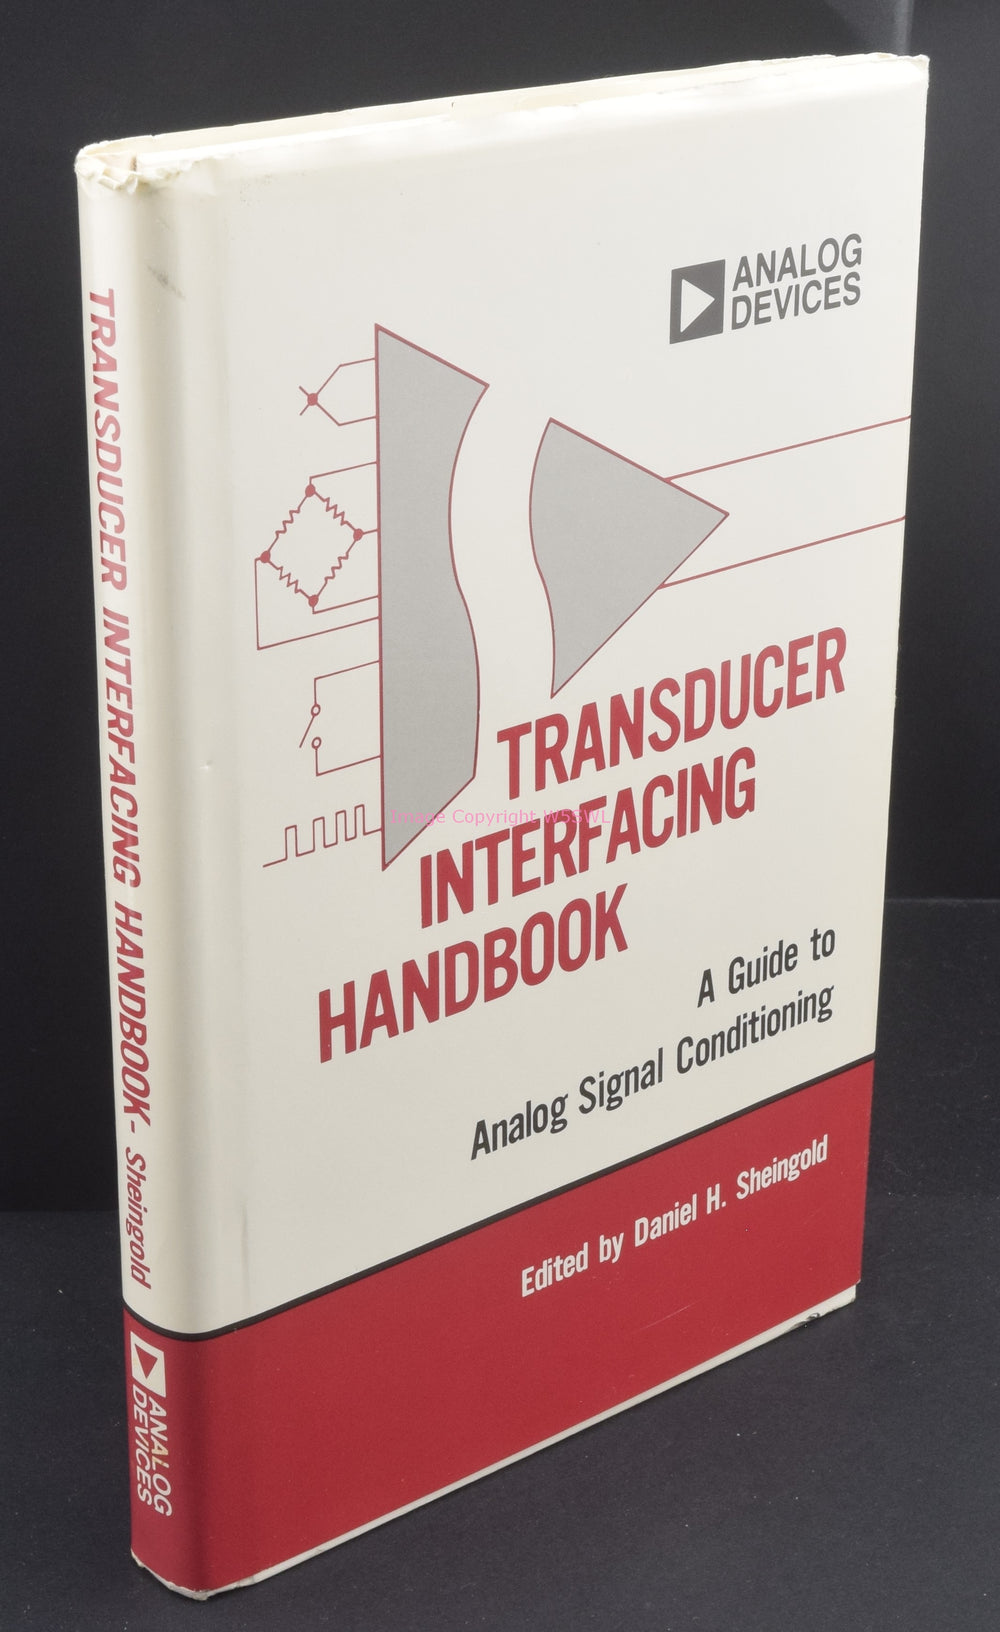 Transducer Interfacing Handbook Analog Devices Guide to Analog Signal Conditioning - Dave's Hobby Shop by W5SWL